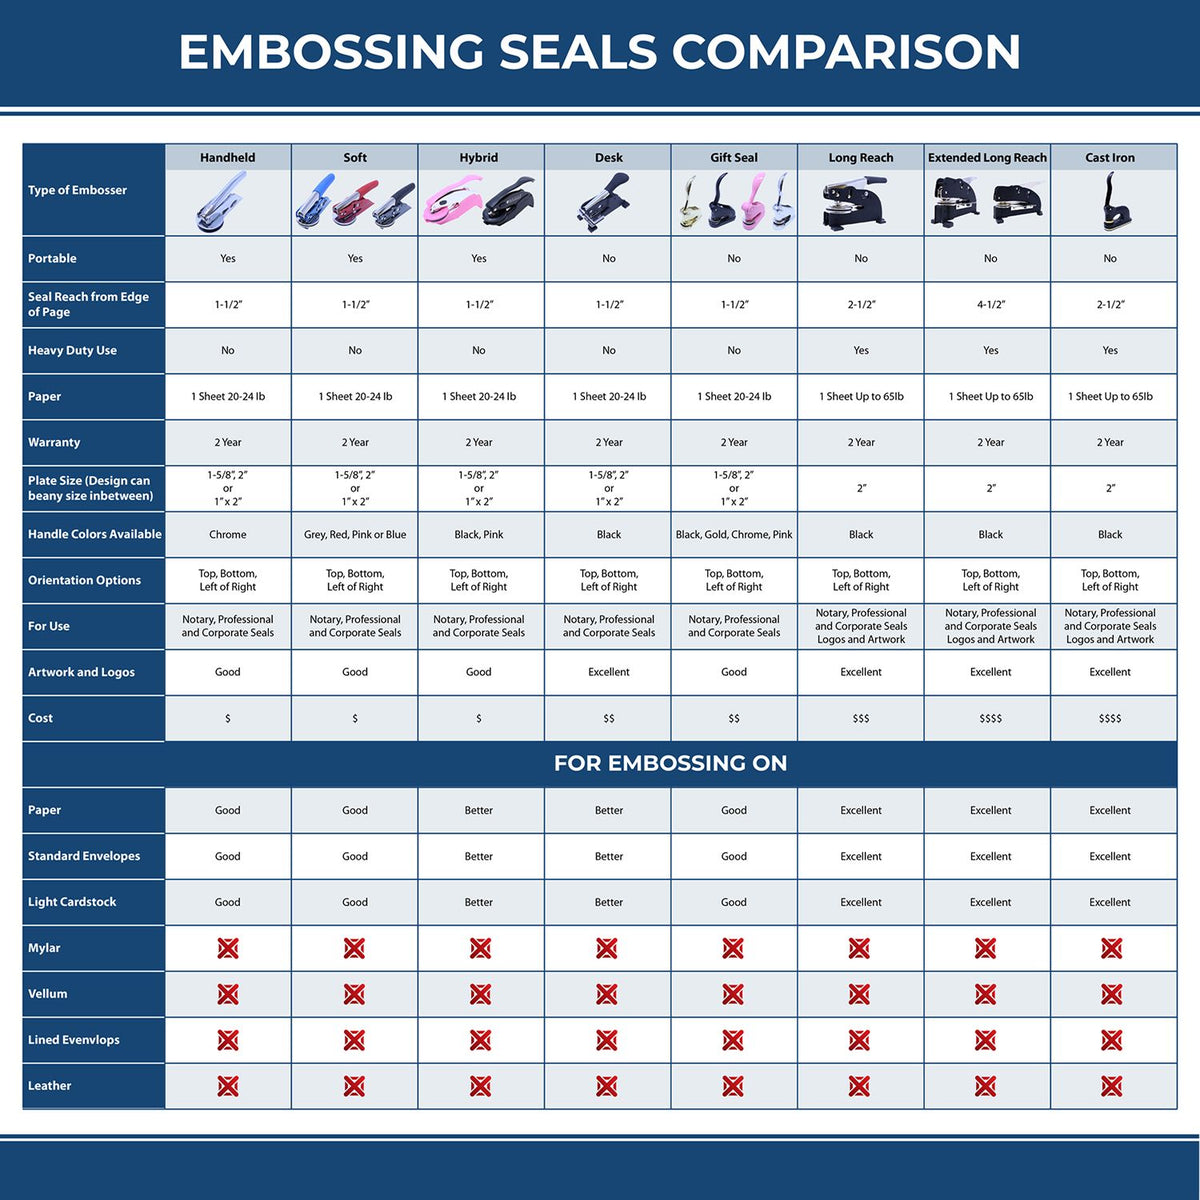 A comparison chart for the different types of mount models available for the State of Michigan Extended Long Reach Geologist Seal